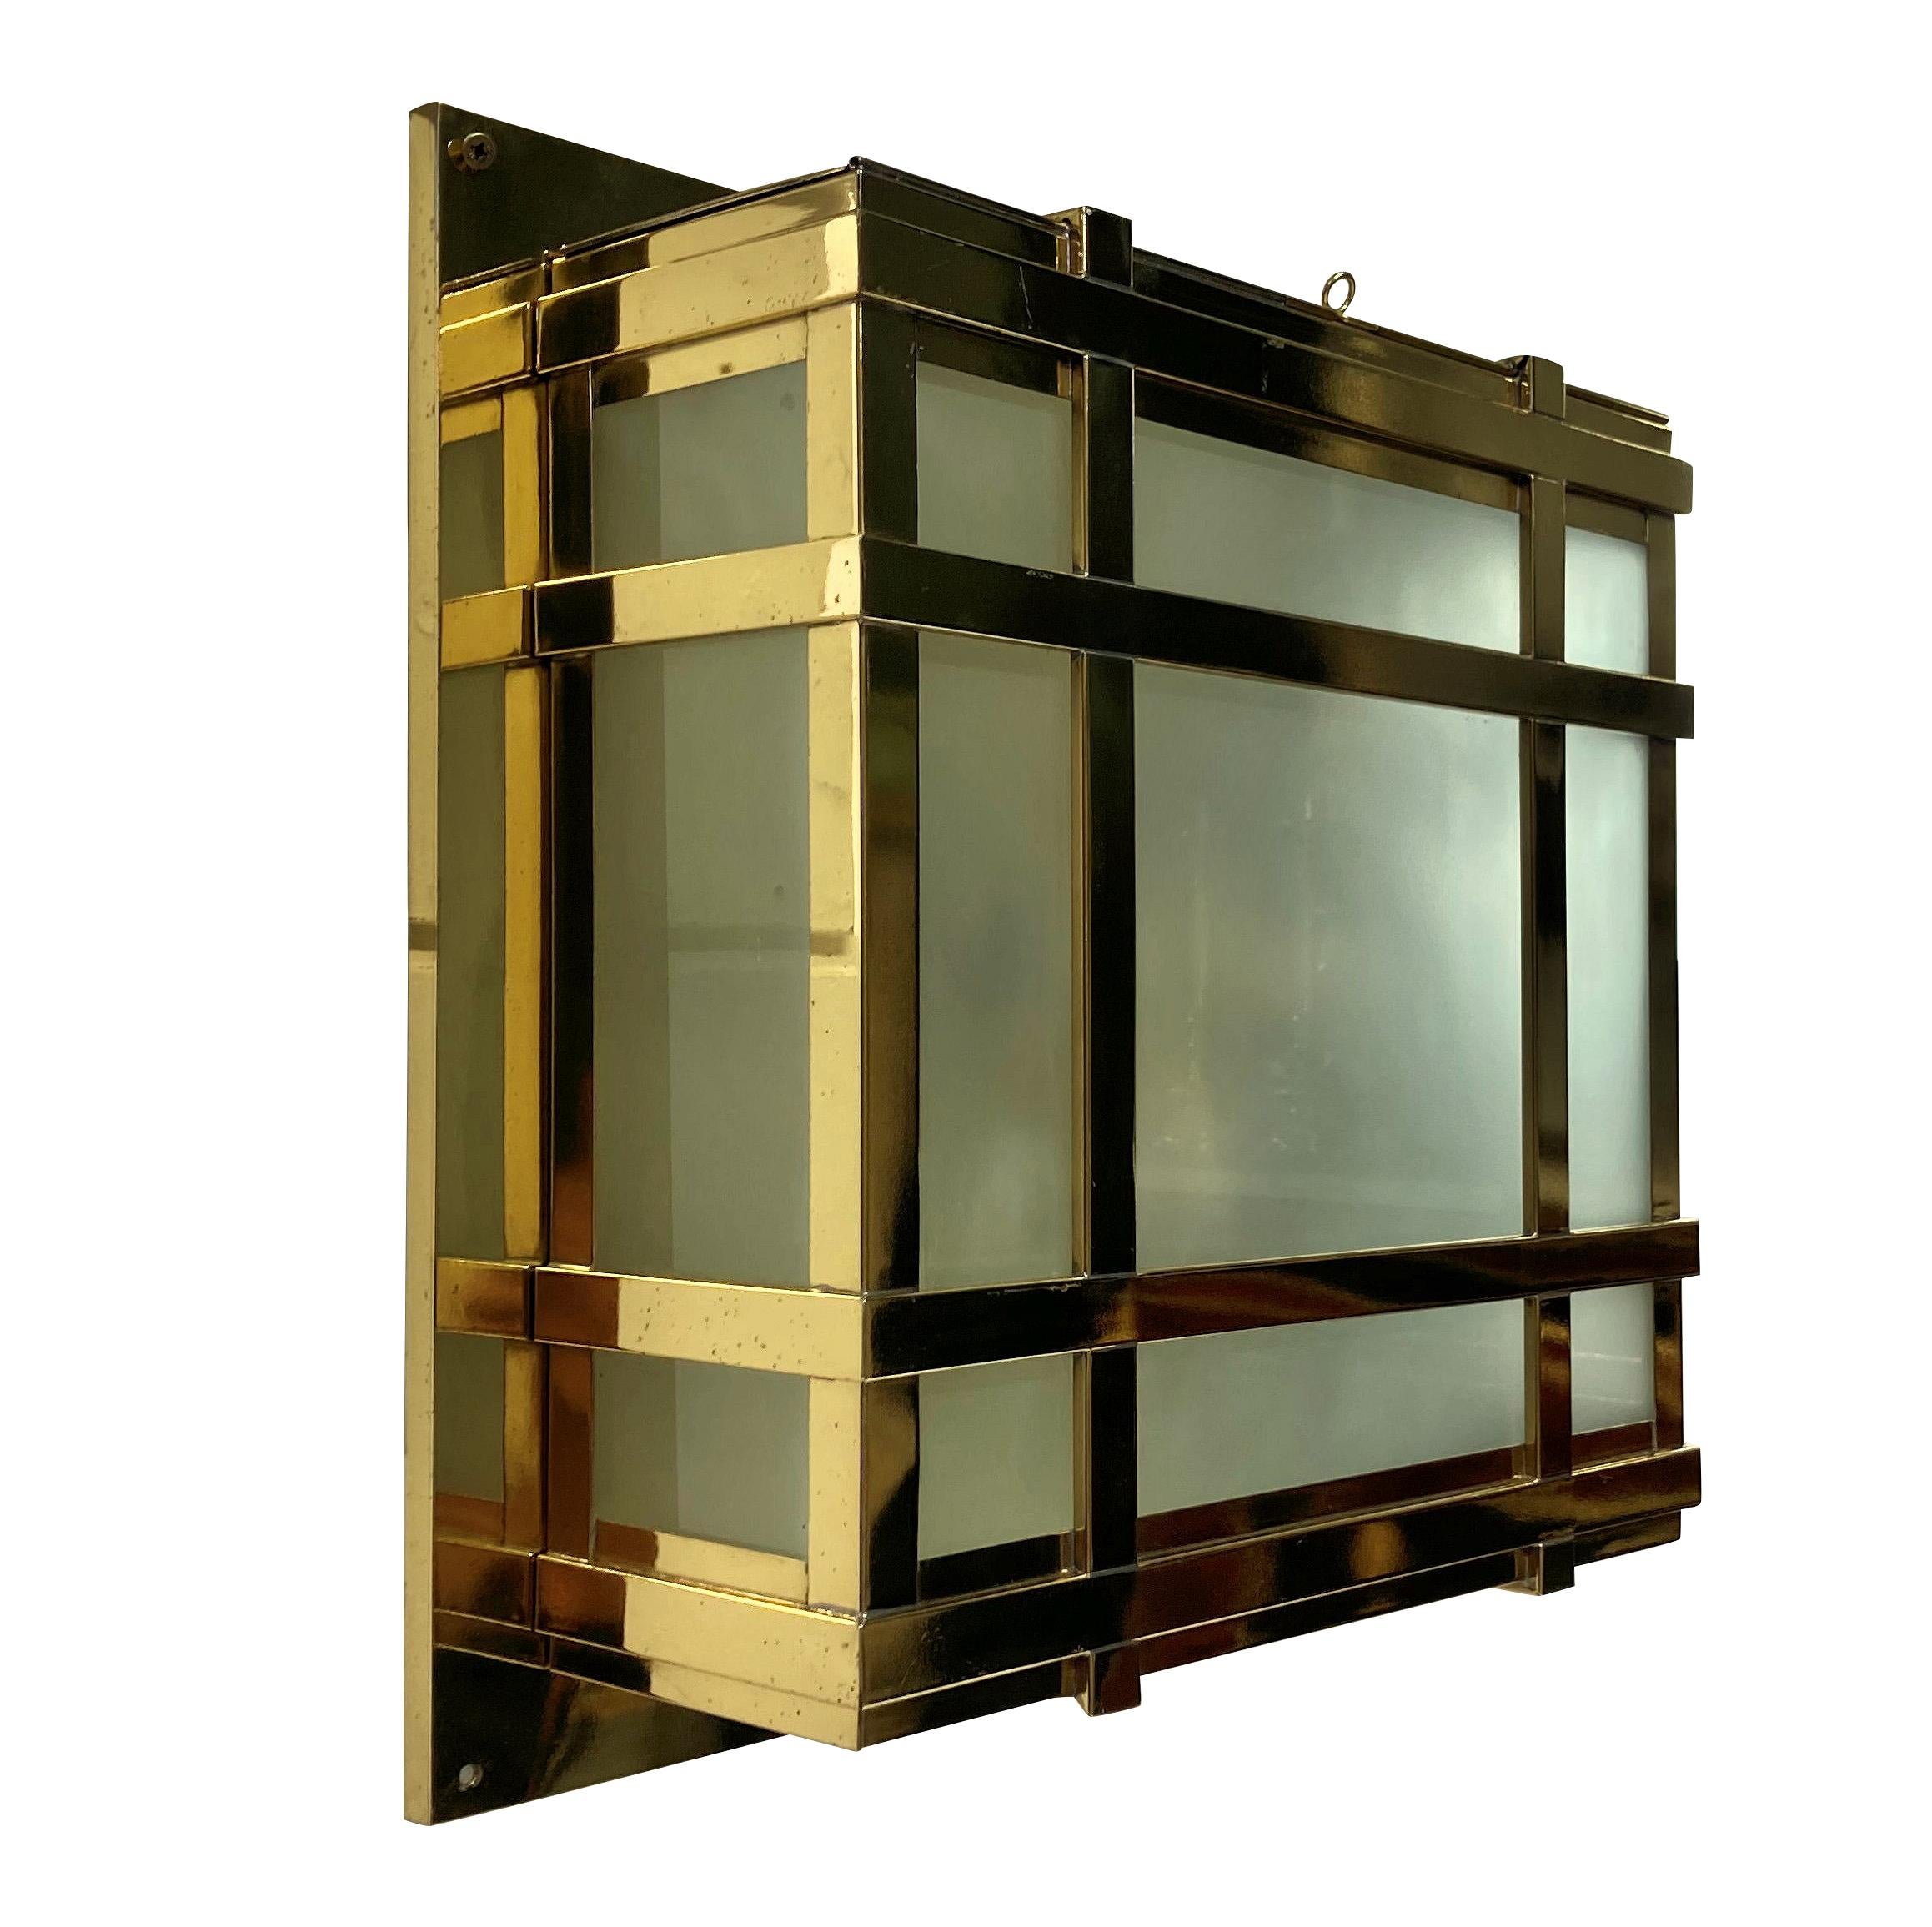 A set of four large American Modernist wall lights in lacquered brass, with opaque glass panels. Each with a door and provision for four lights inside each.